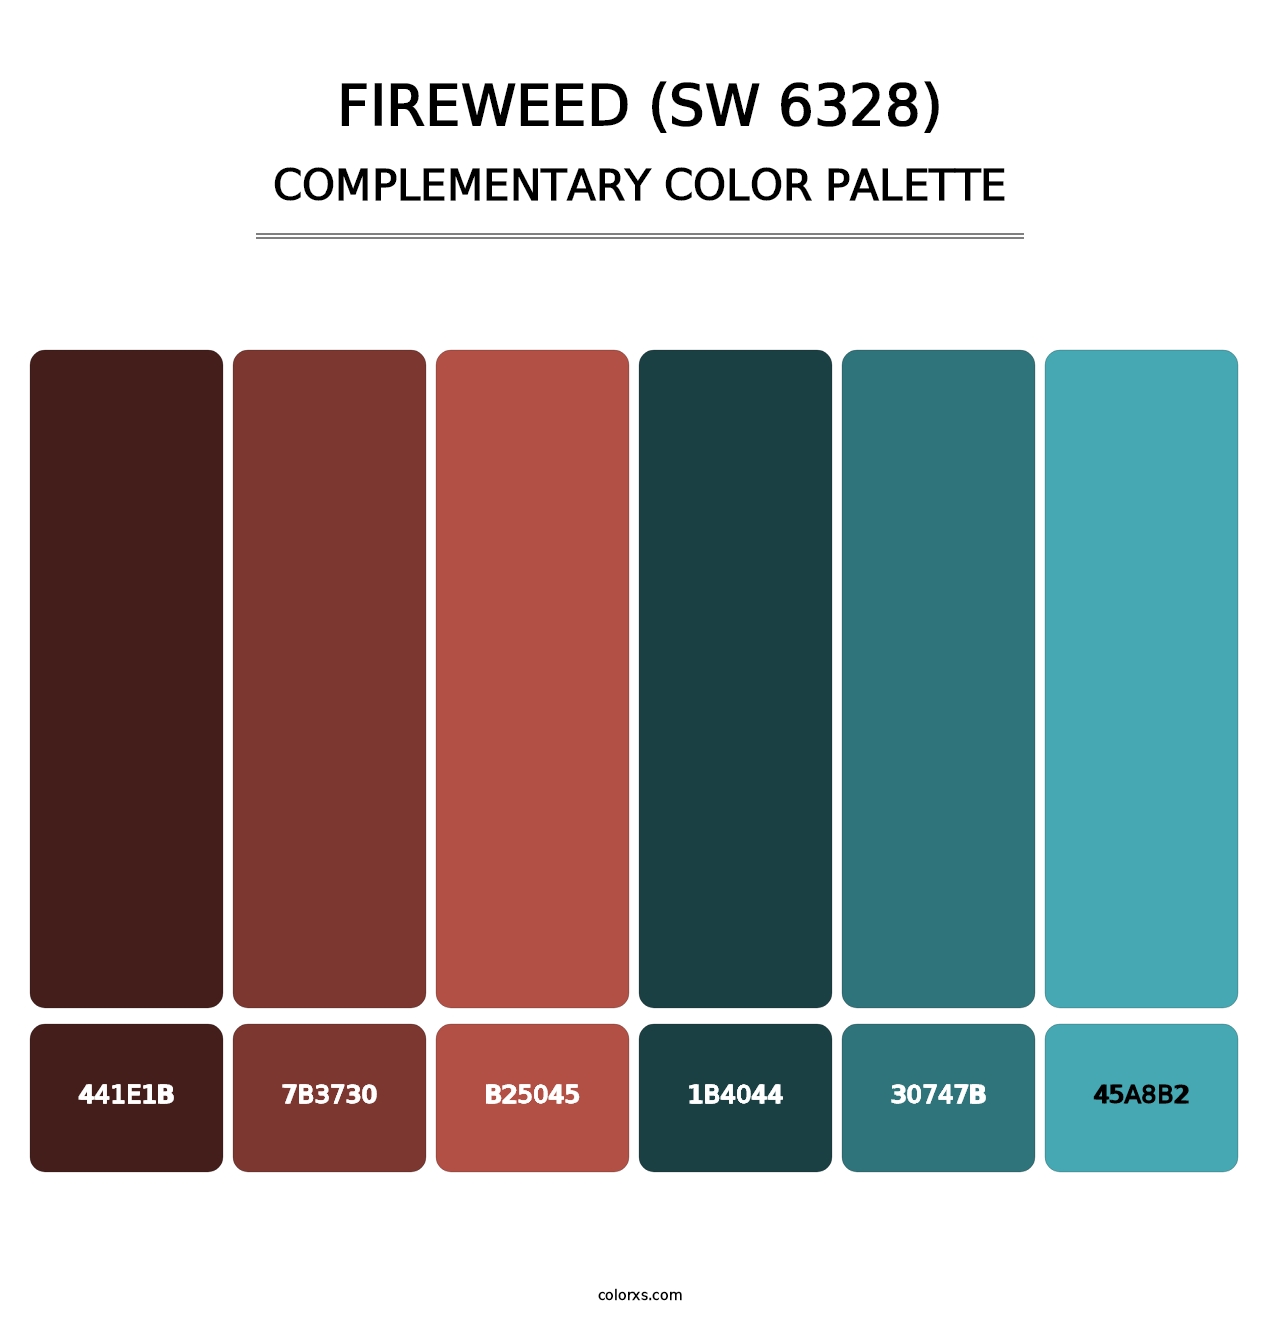 Fireweed (SW 6328) - Complementary Color Palette